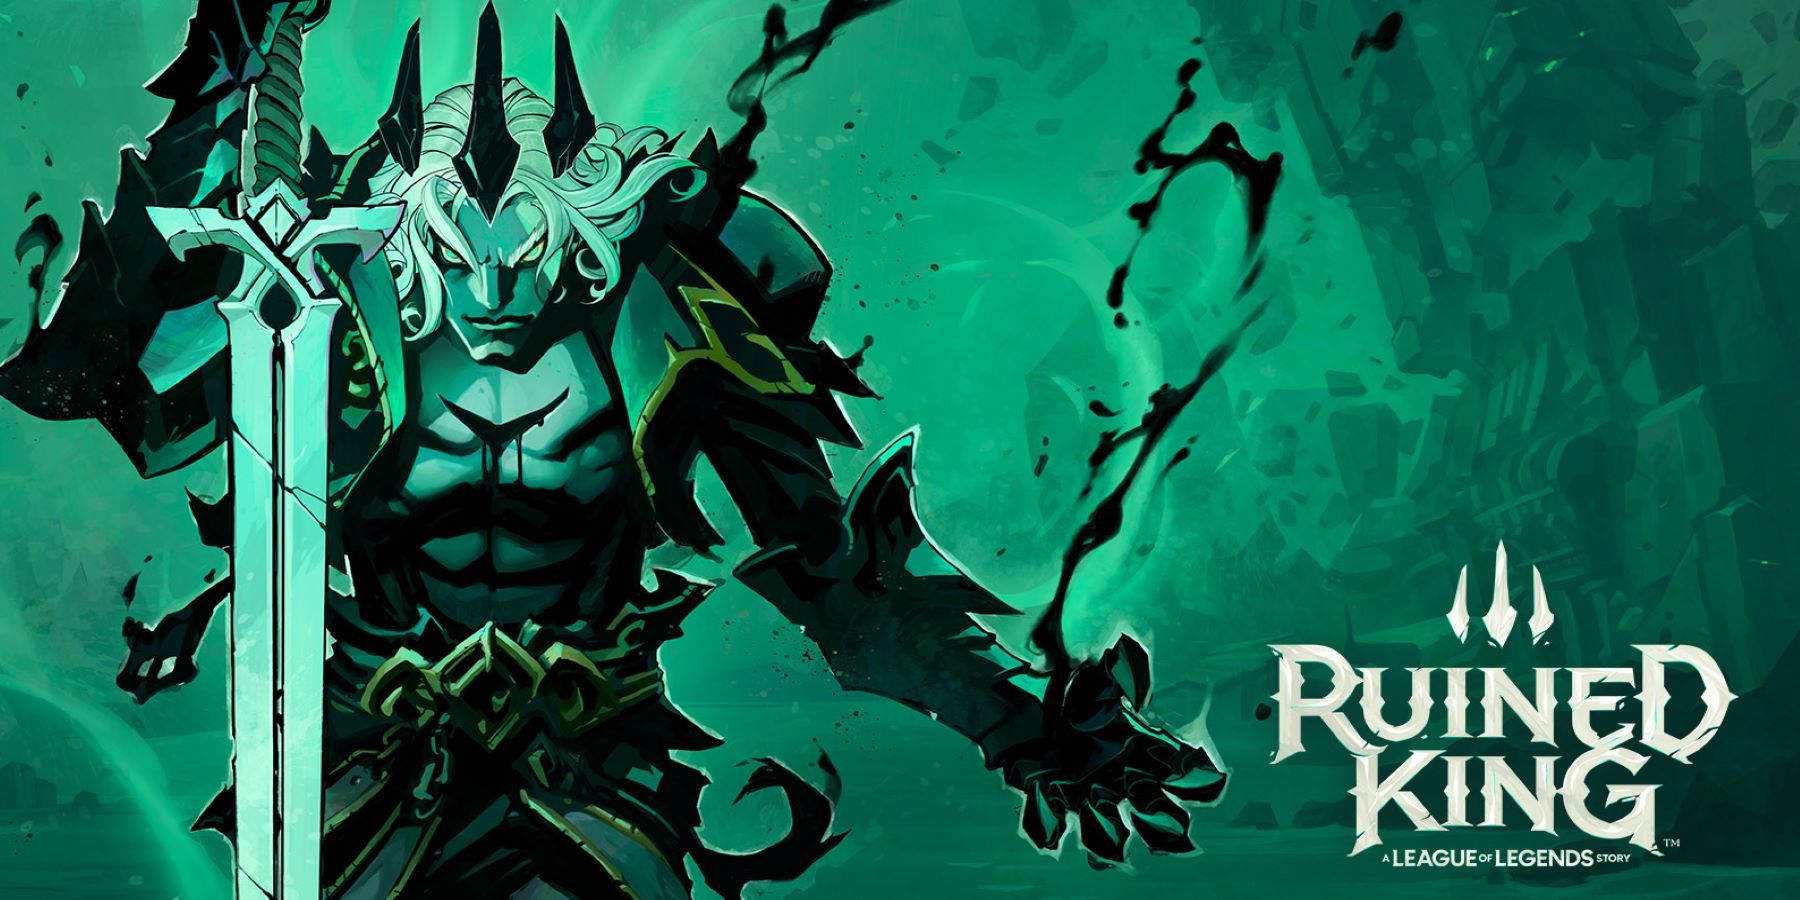 Ruined King A League of Legends Story Launched